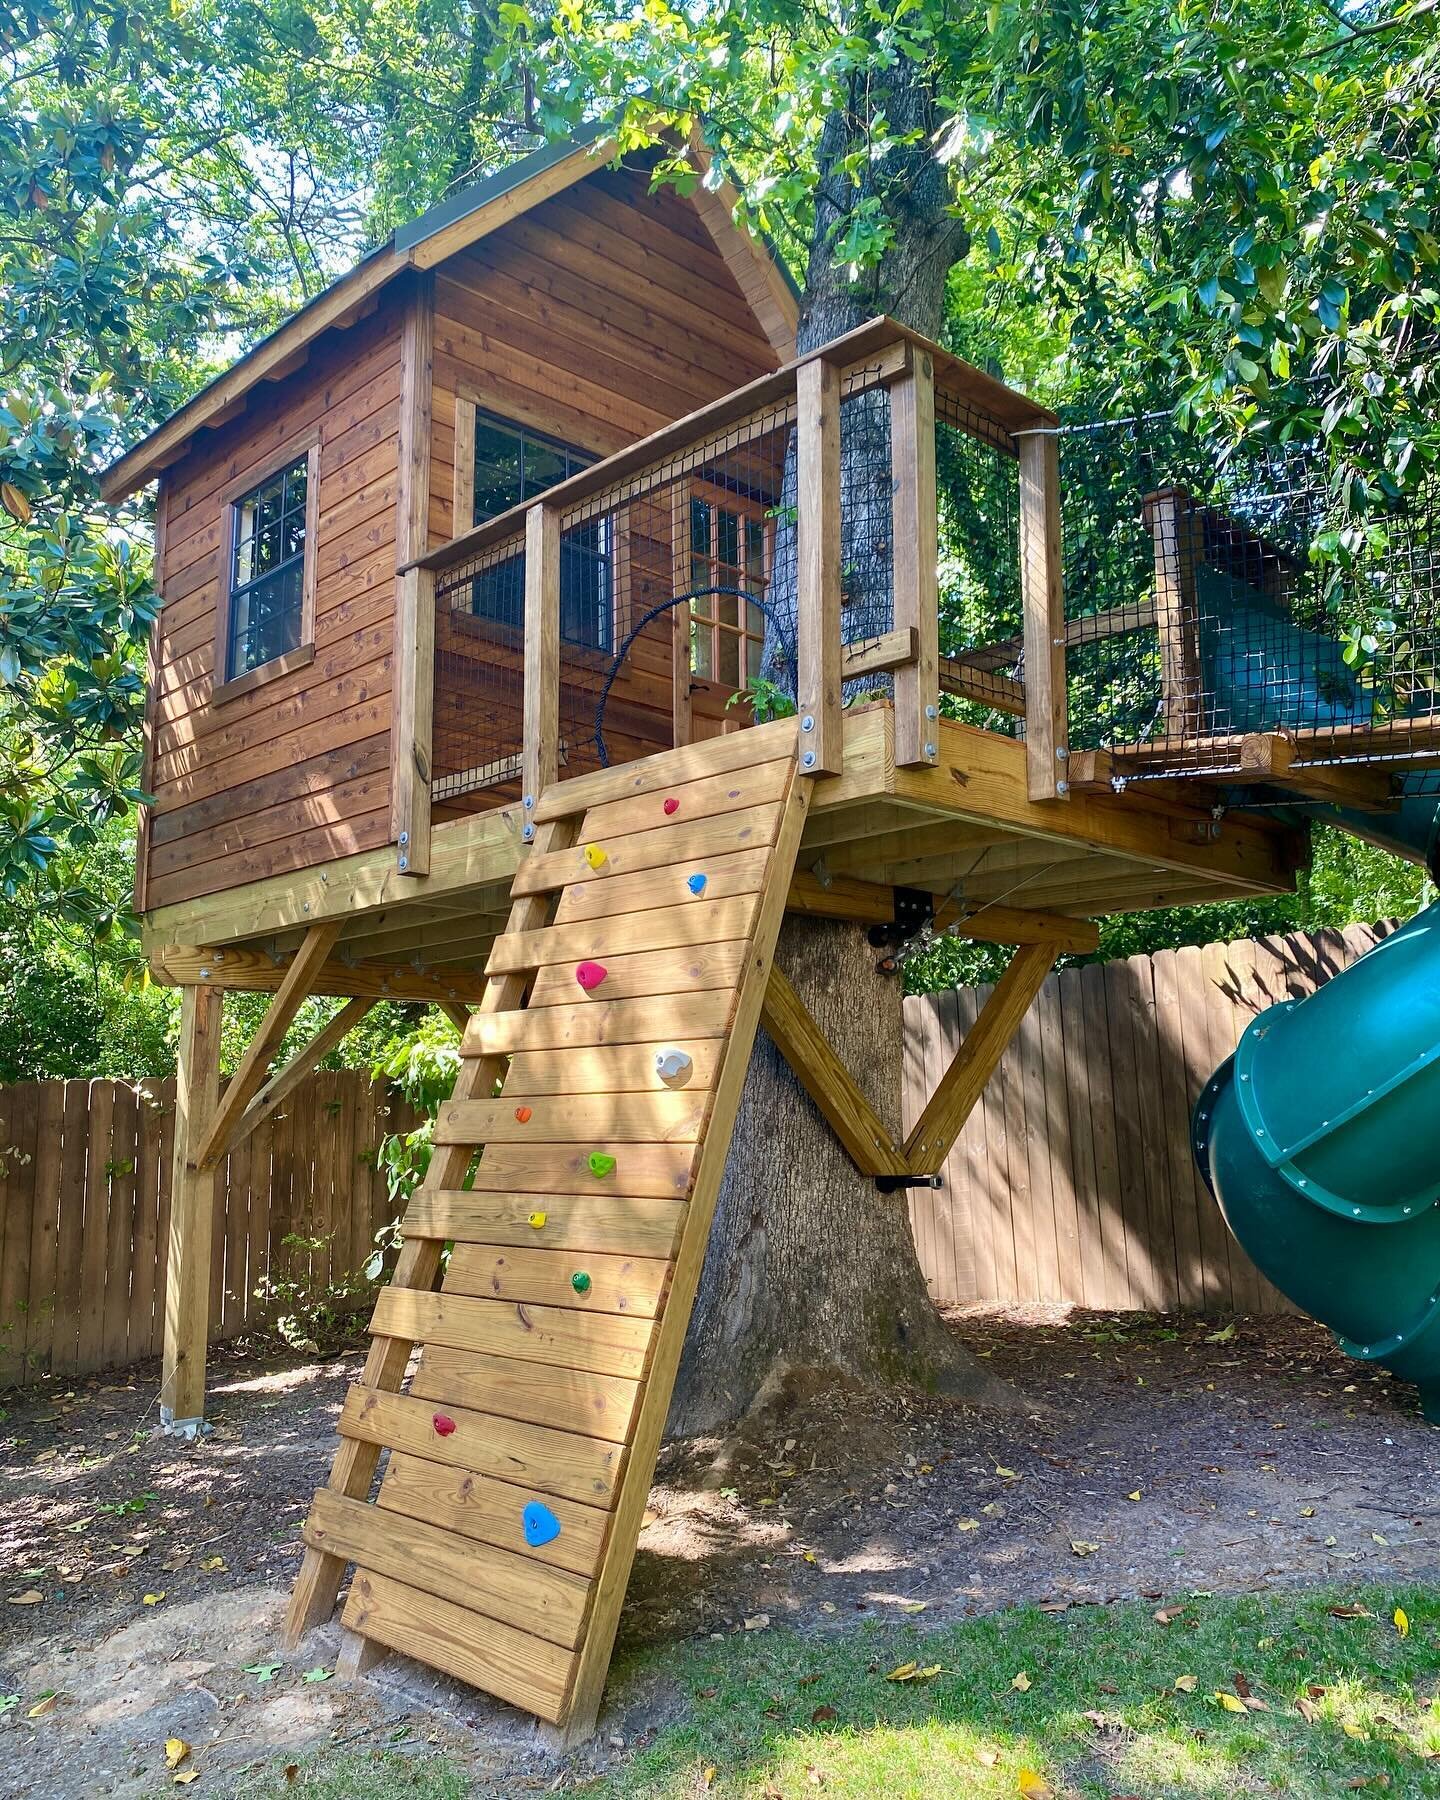 🌳🏡 Welcome to the ultimate treehouse experience! 

Check out this classic treehouse, customized with various accessories for a lot of fun! 🎉

🔥 Fireman&rsquo;s Pole: for an exciting exit after a day of play!
🧗&zwj;♂️ Climbing Wall: access the tr